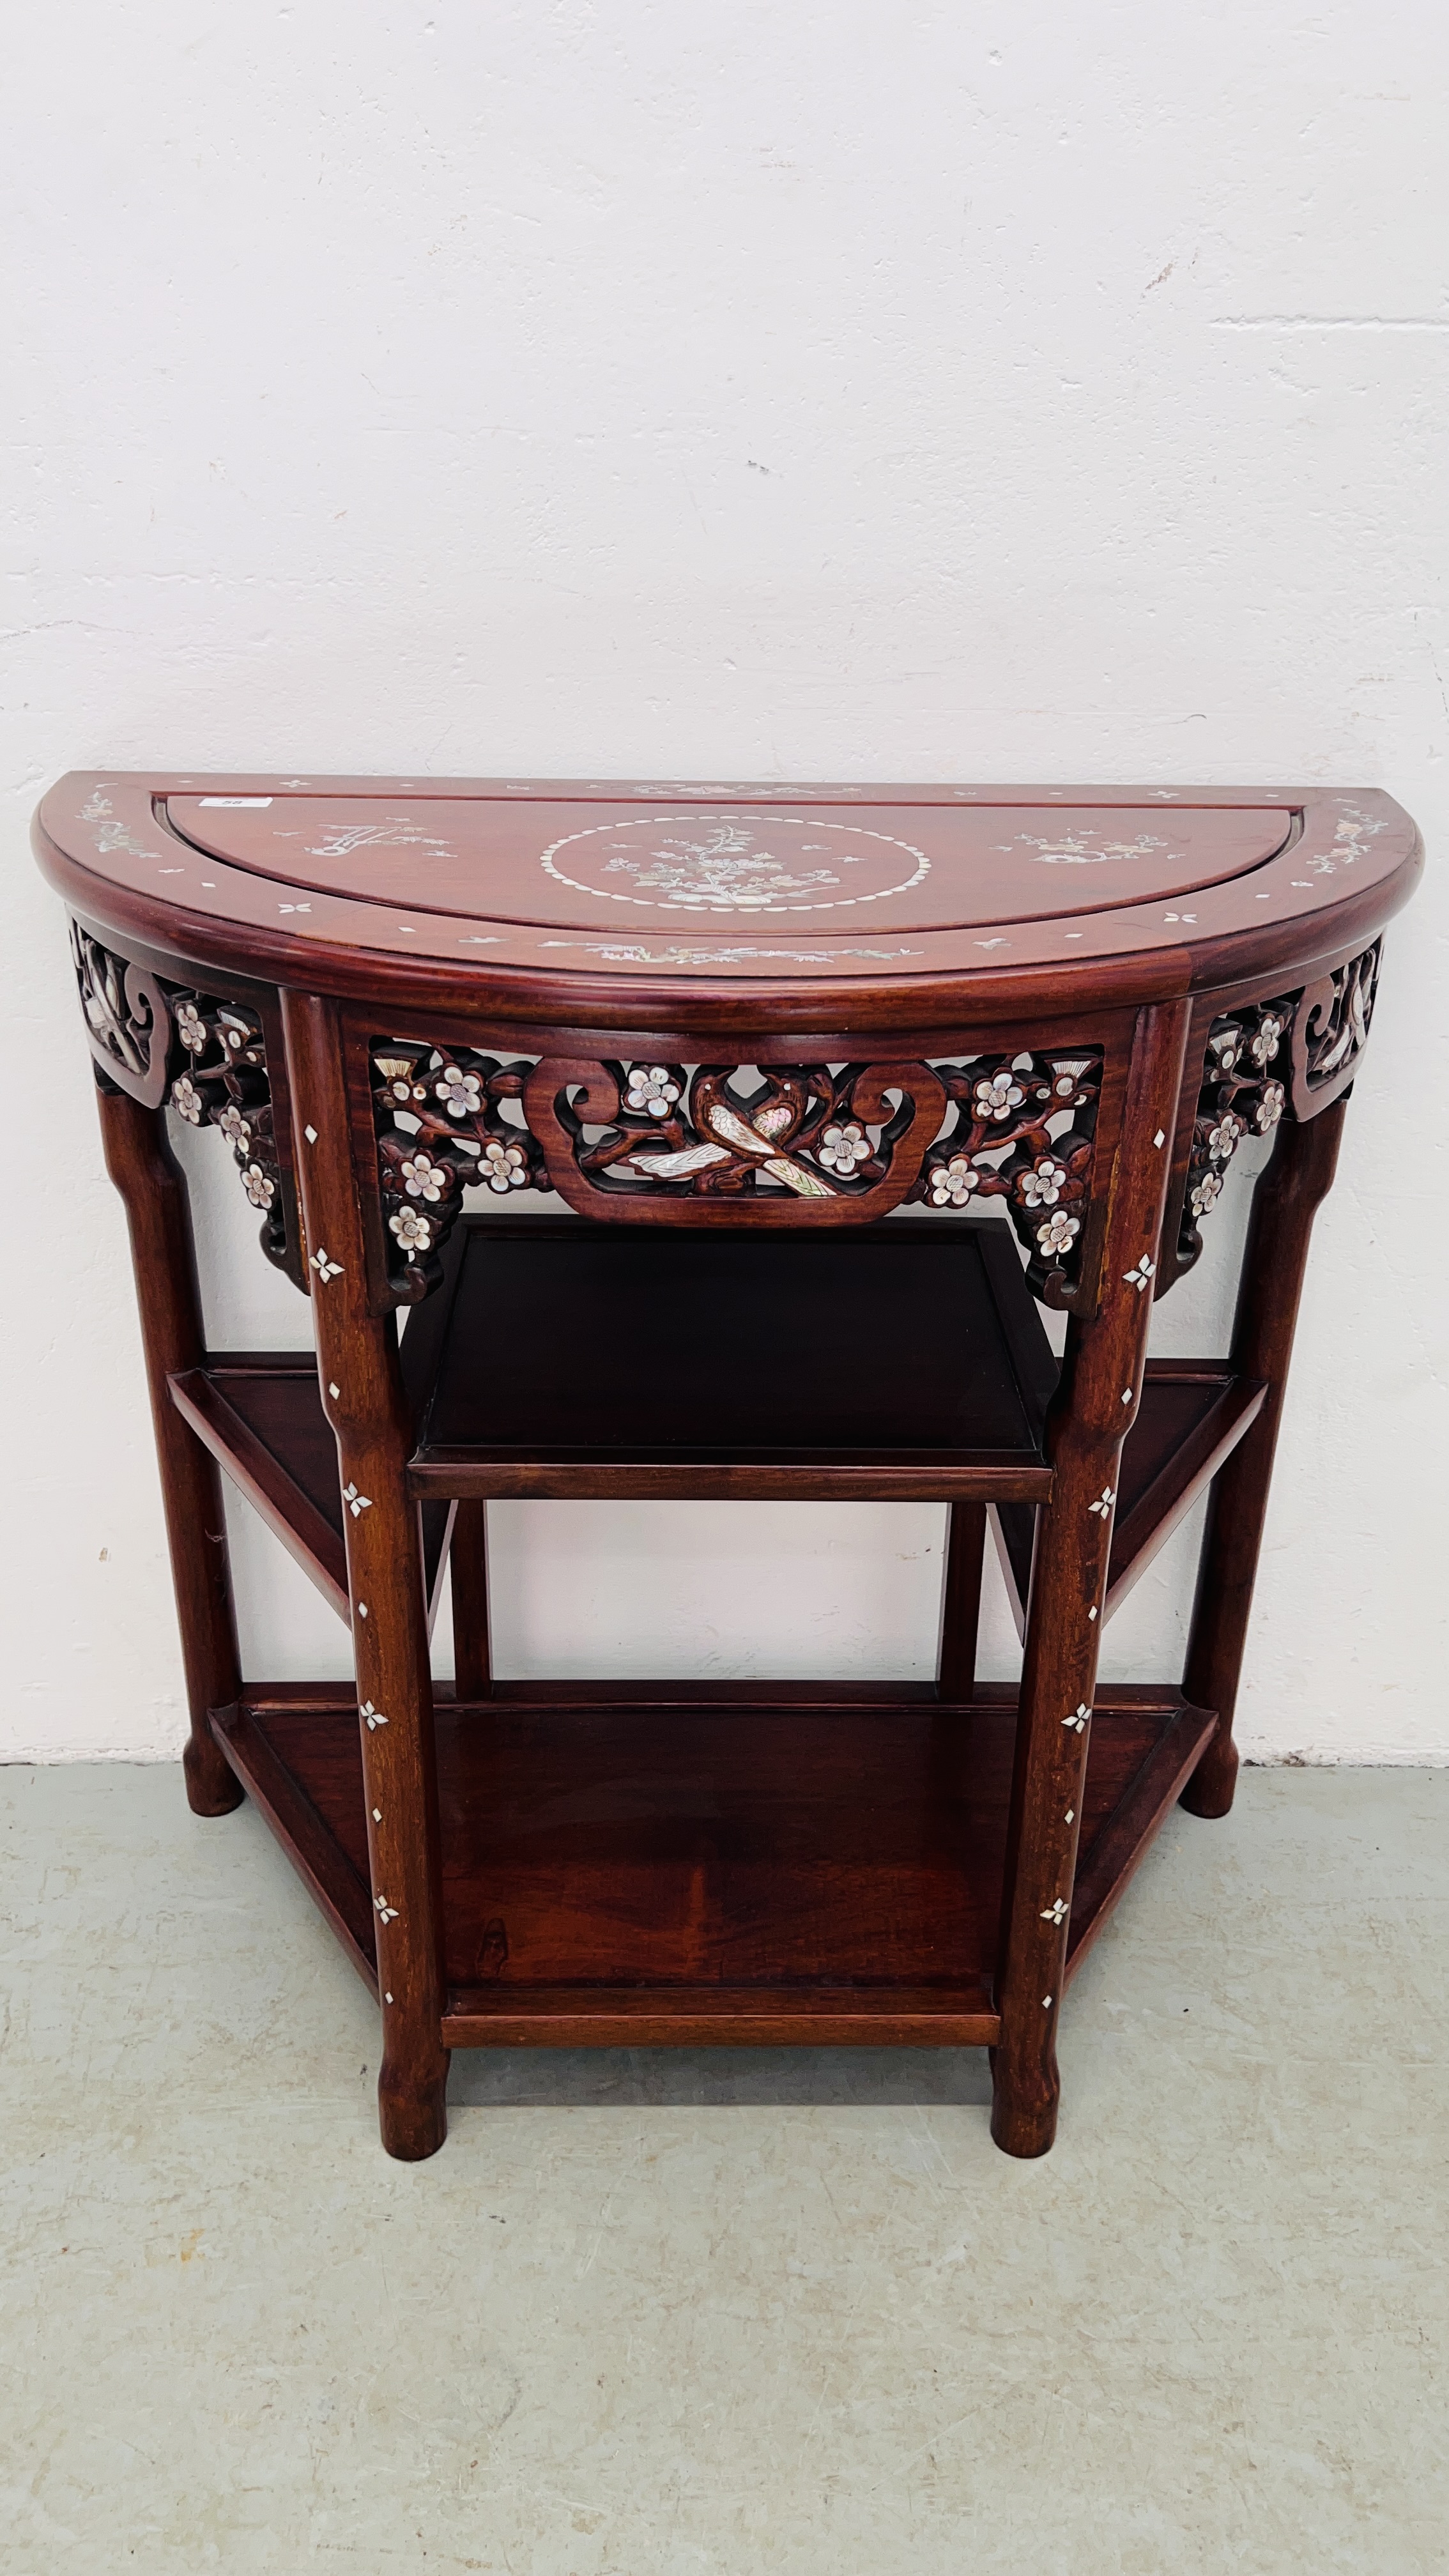 AN ORIENTAL HARDWOOD AND MOTHER OF PEARL INLAID SIDE TABLE WITH SHELF BELOW.